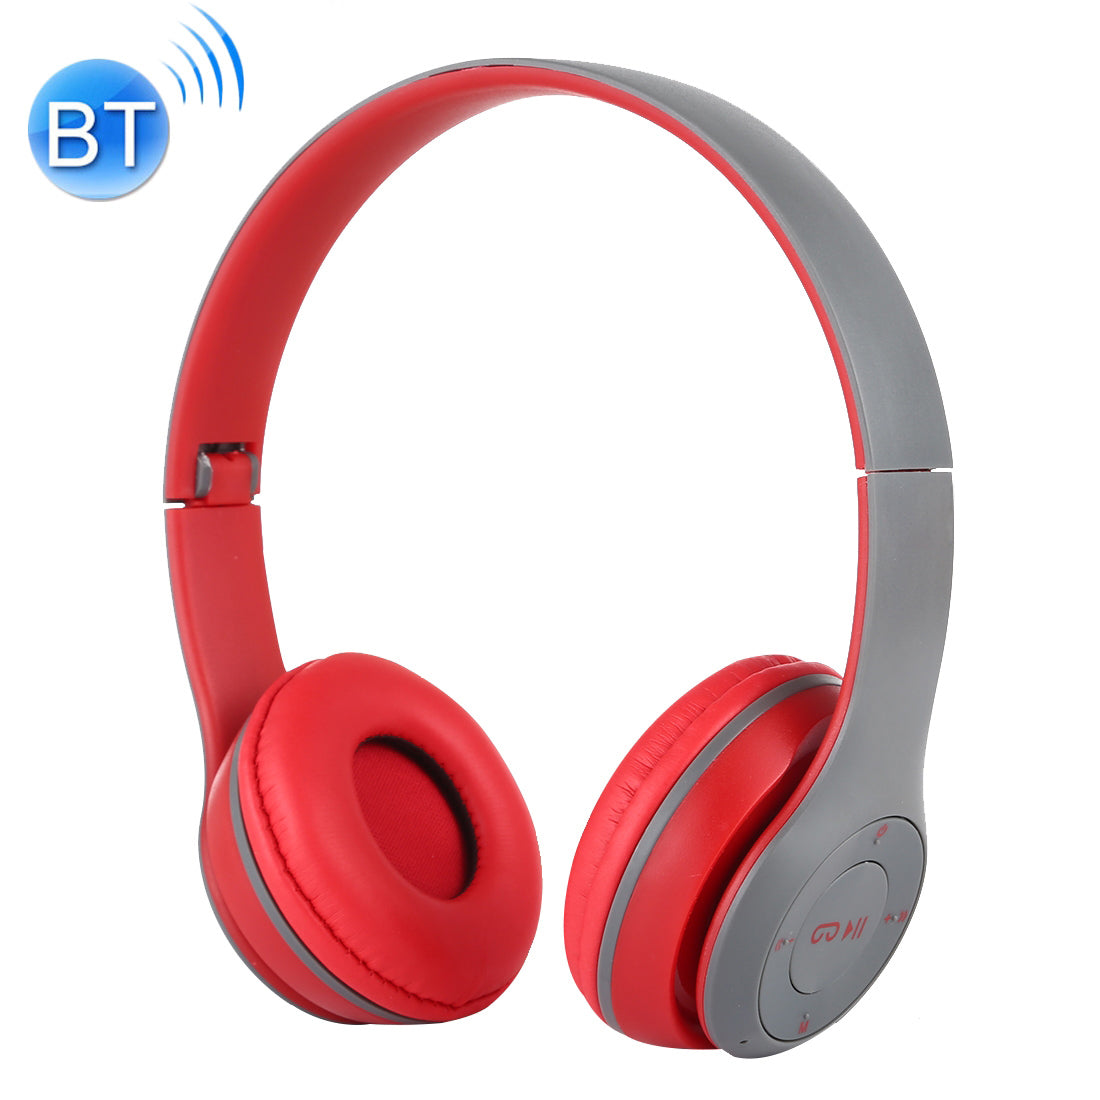 Premium Stereo Bluetooth Headphone with Call Support, Mic,  3.5mm Audio Jack, FM